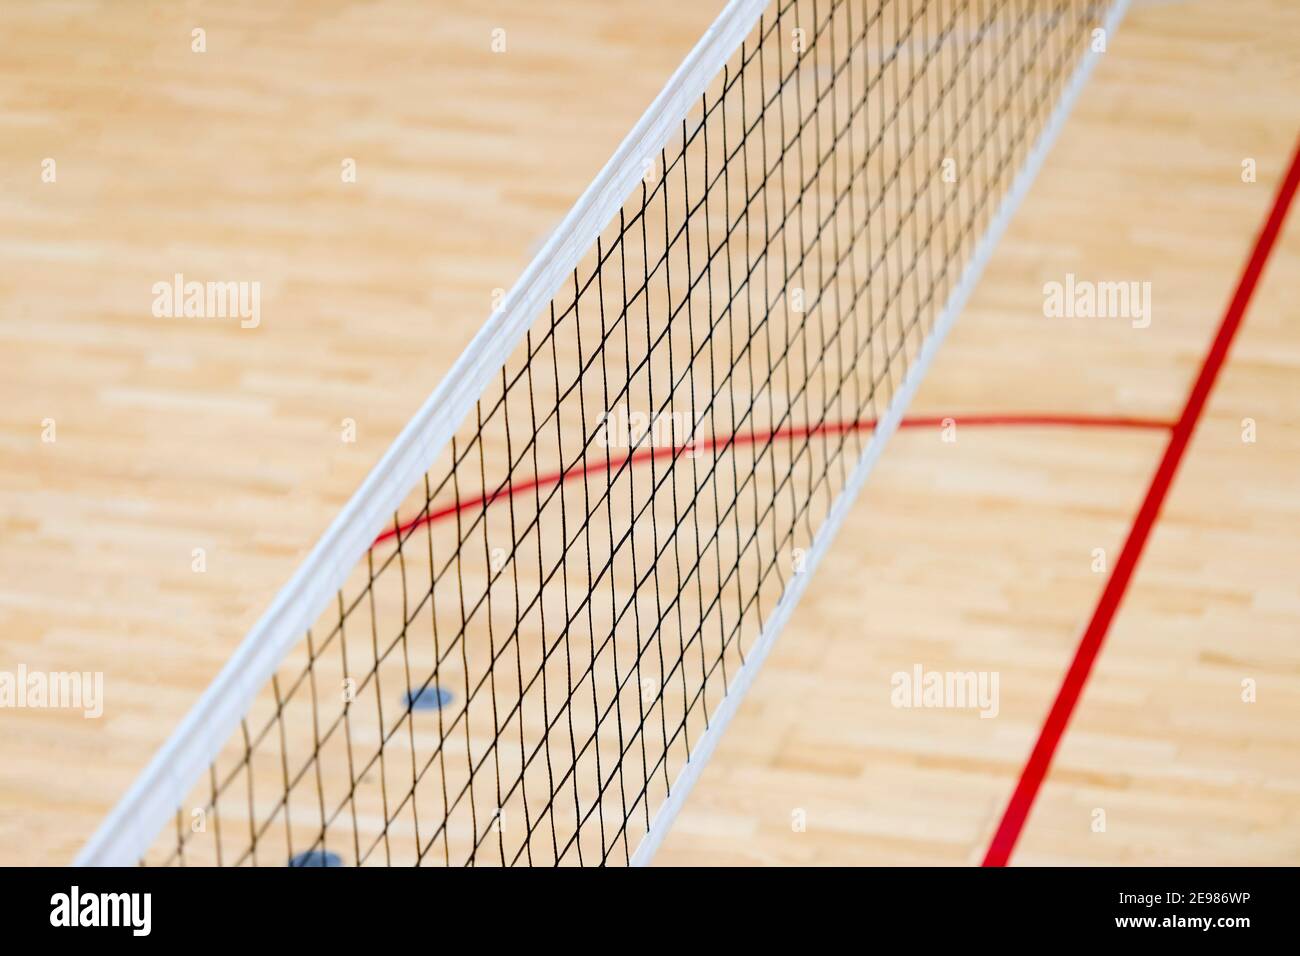 Elementary school gym indoor with volleyball net. Team sport concept Stock Photo